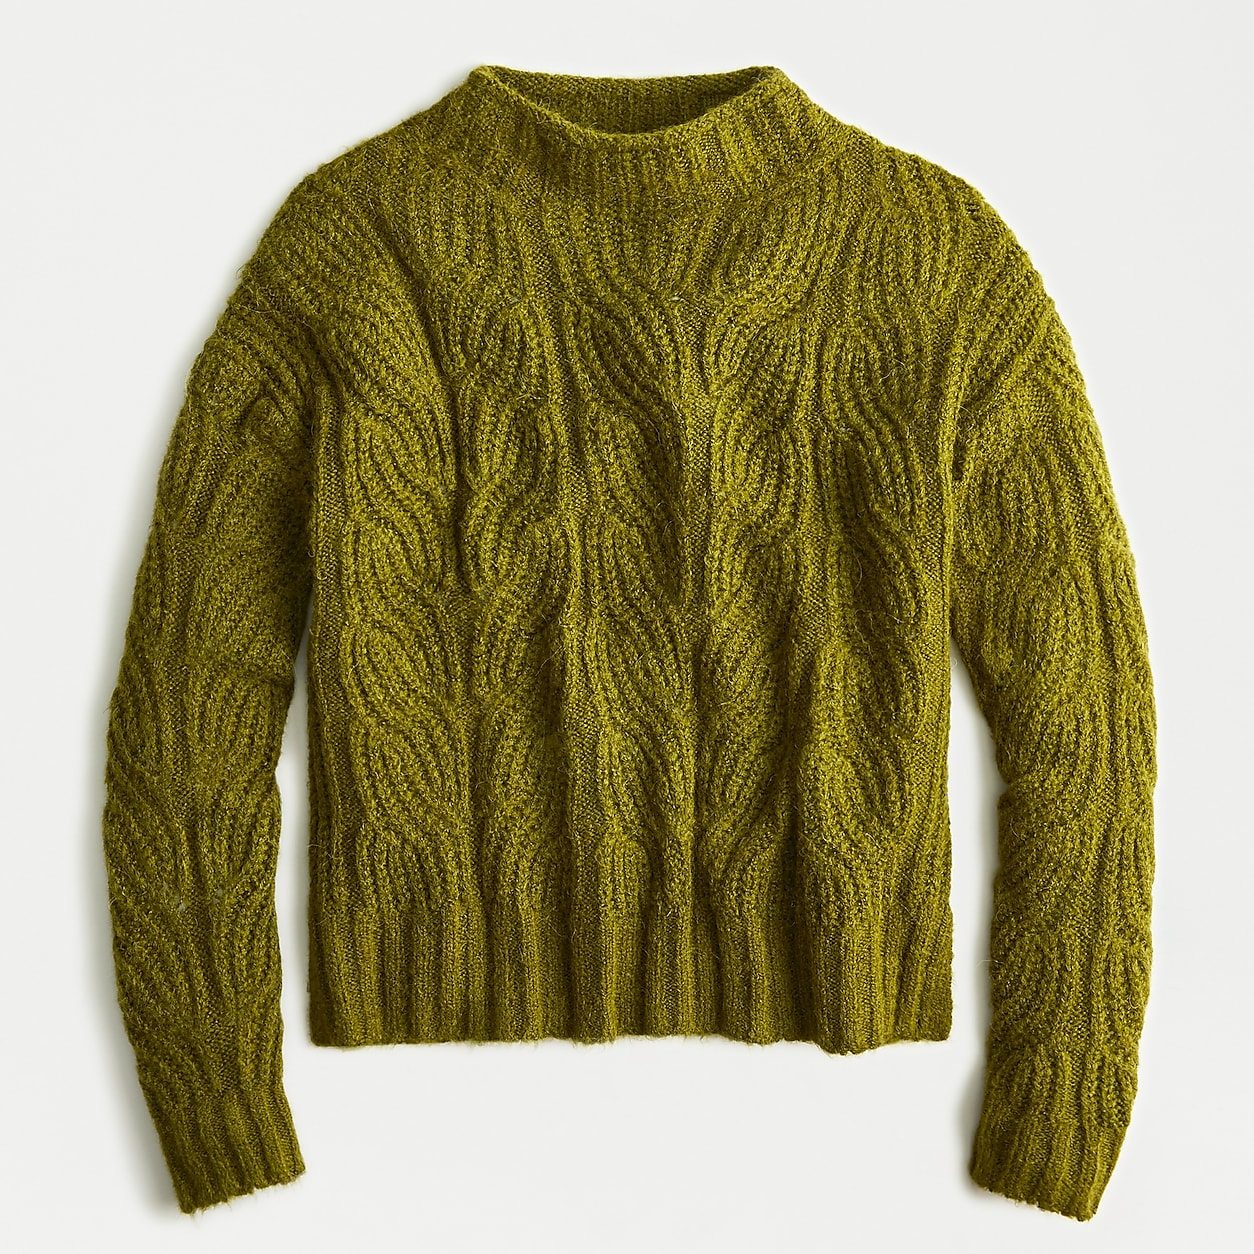 Pointelle cable sweater